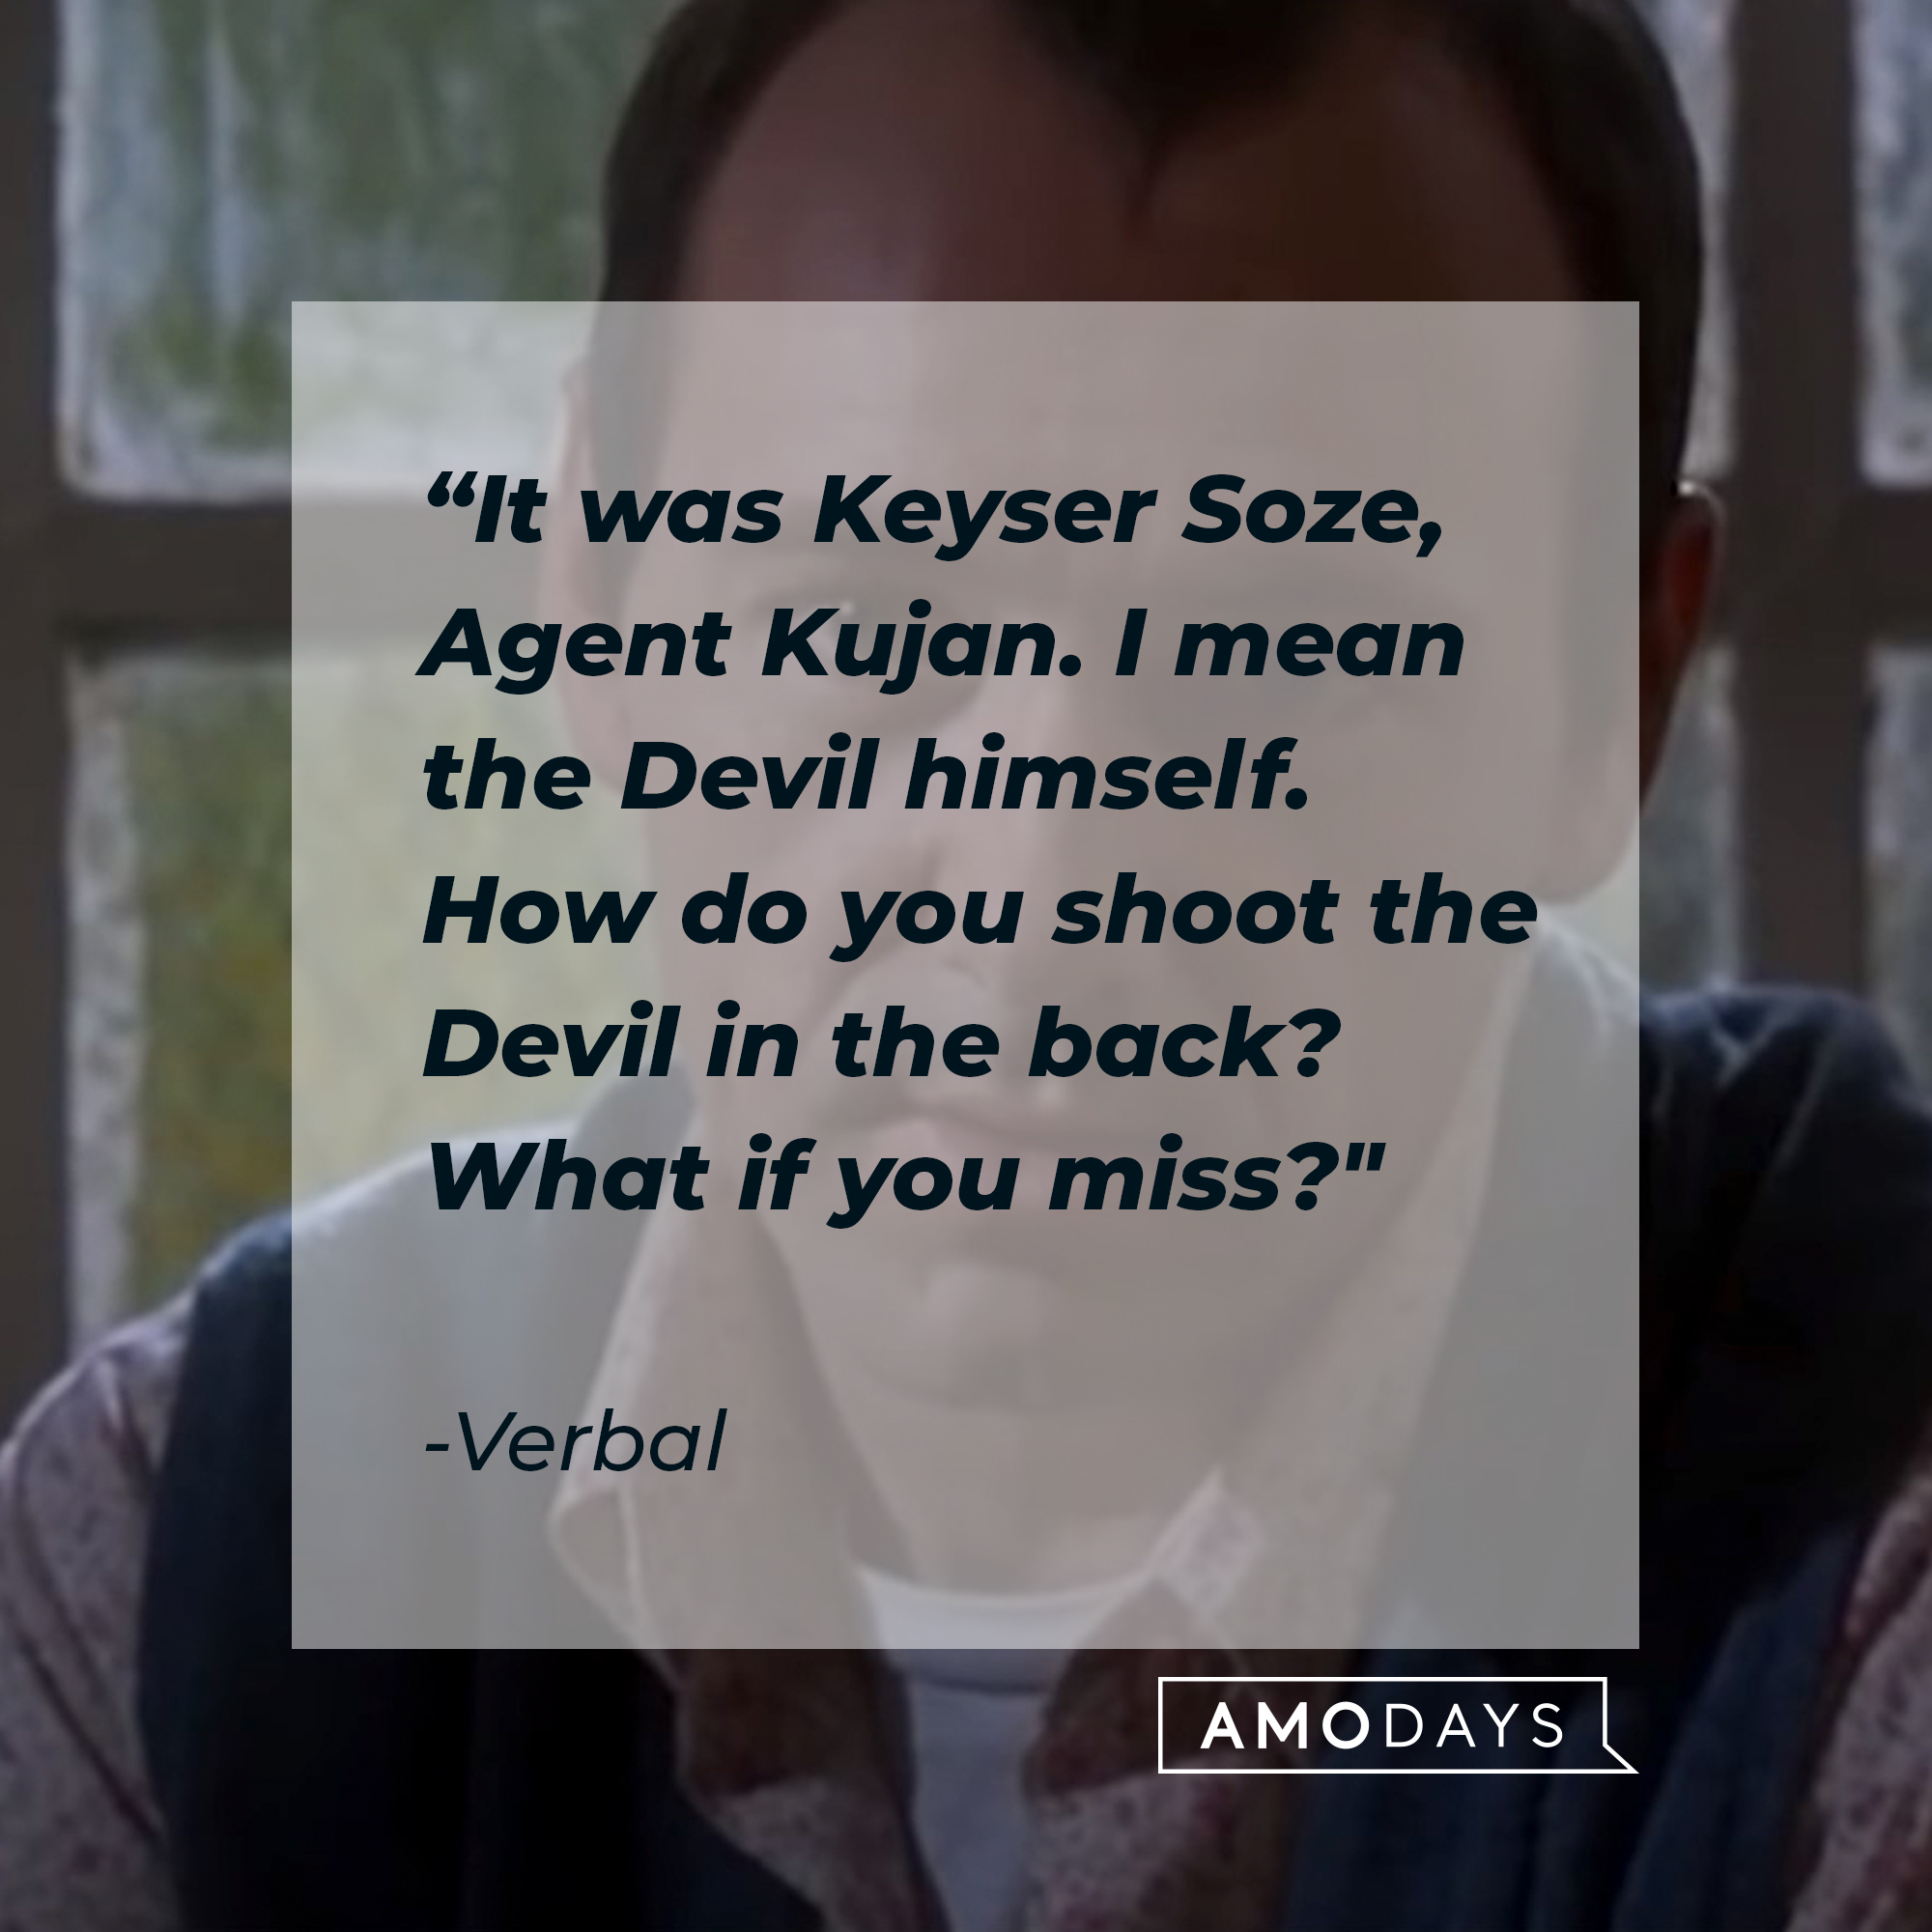 Verbal's quote: “It was Keyser Soze, Agent Kujan. I mean the Devil himself. How do you shoot the Devil in the back? What if you miss?" | Source: facebook.com/usualsuspectsmovie